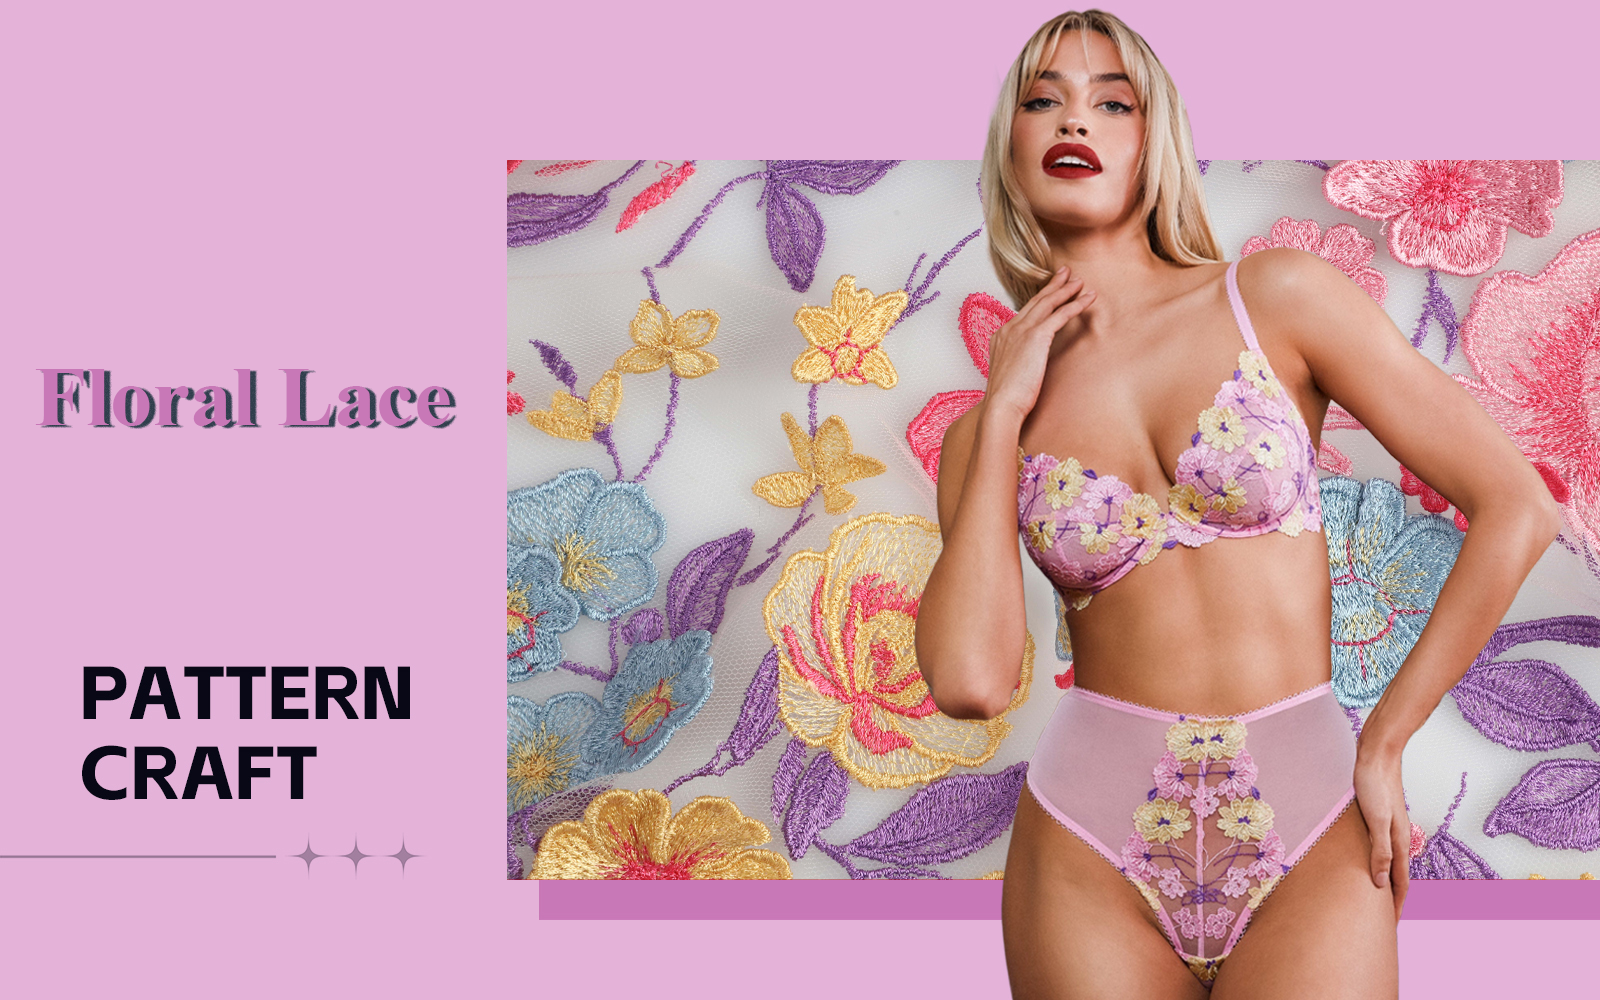 Diverse Florals -- The Pattern Craft Trend for Women's Lace Lingerie